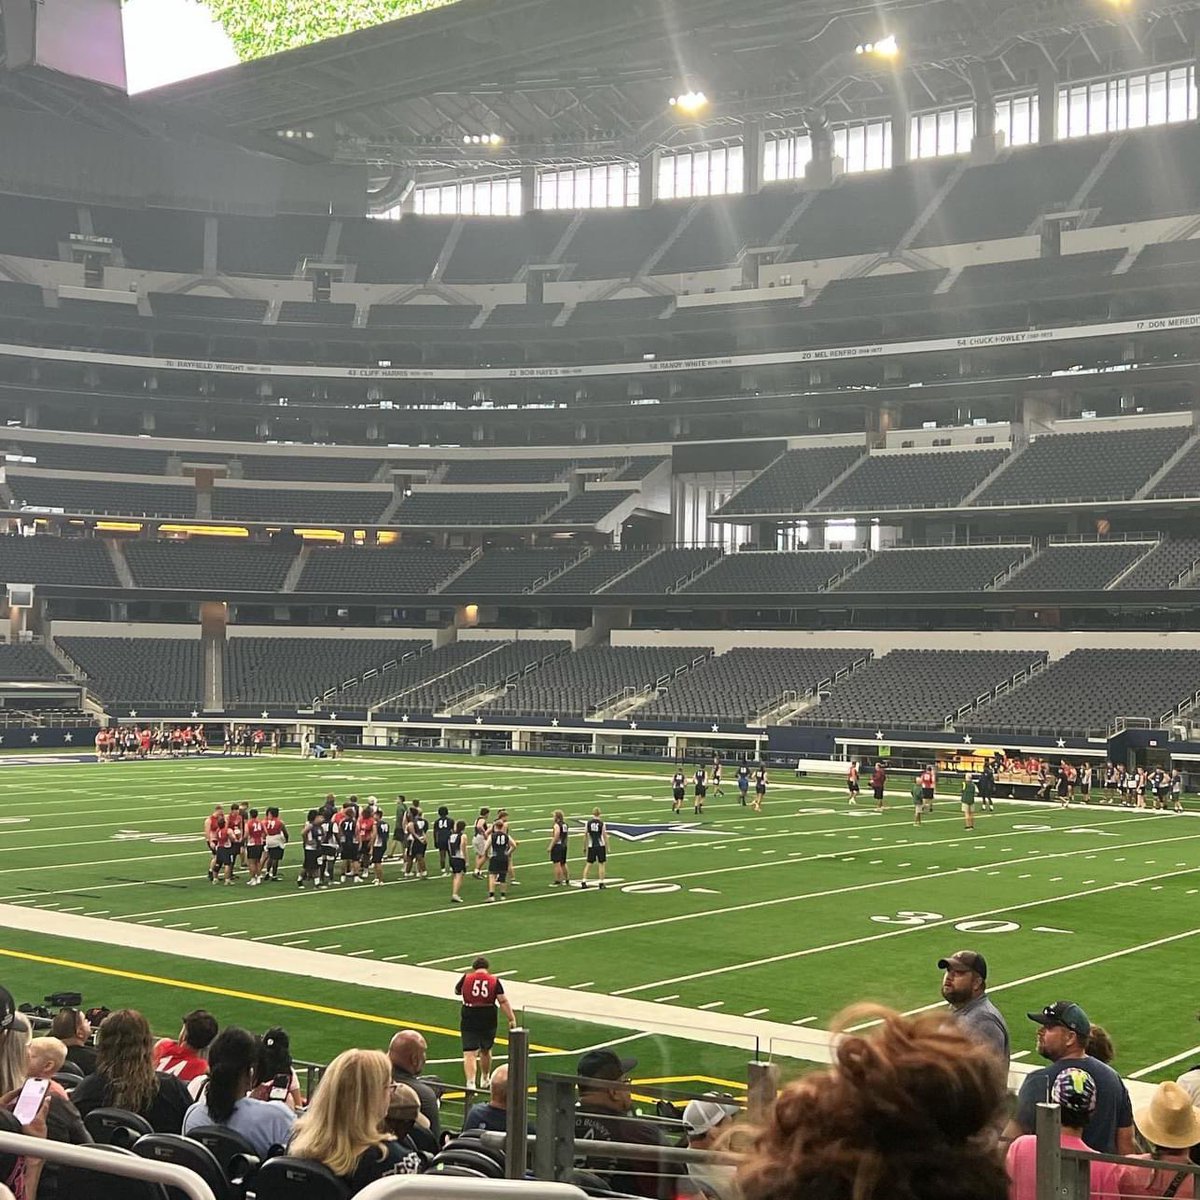 Seating view for AT&T Center Section 120 Row 31 Seat 7